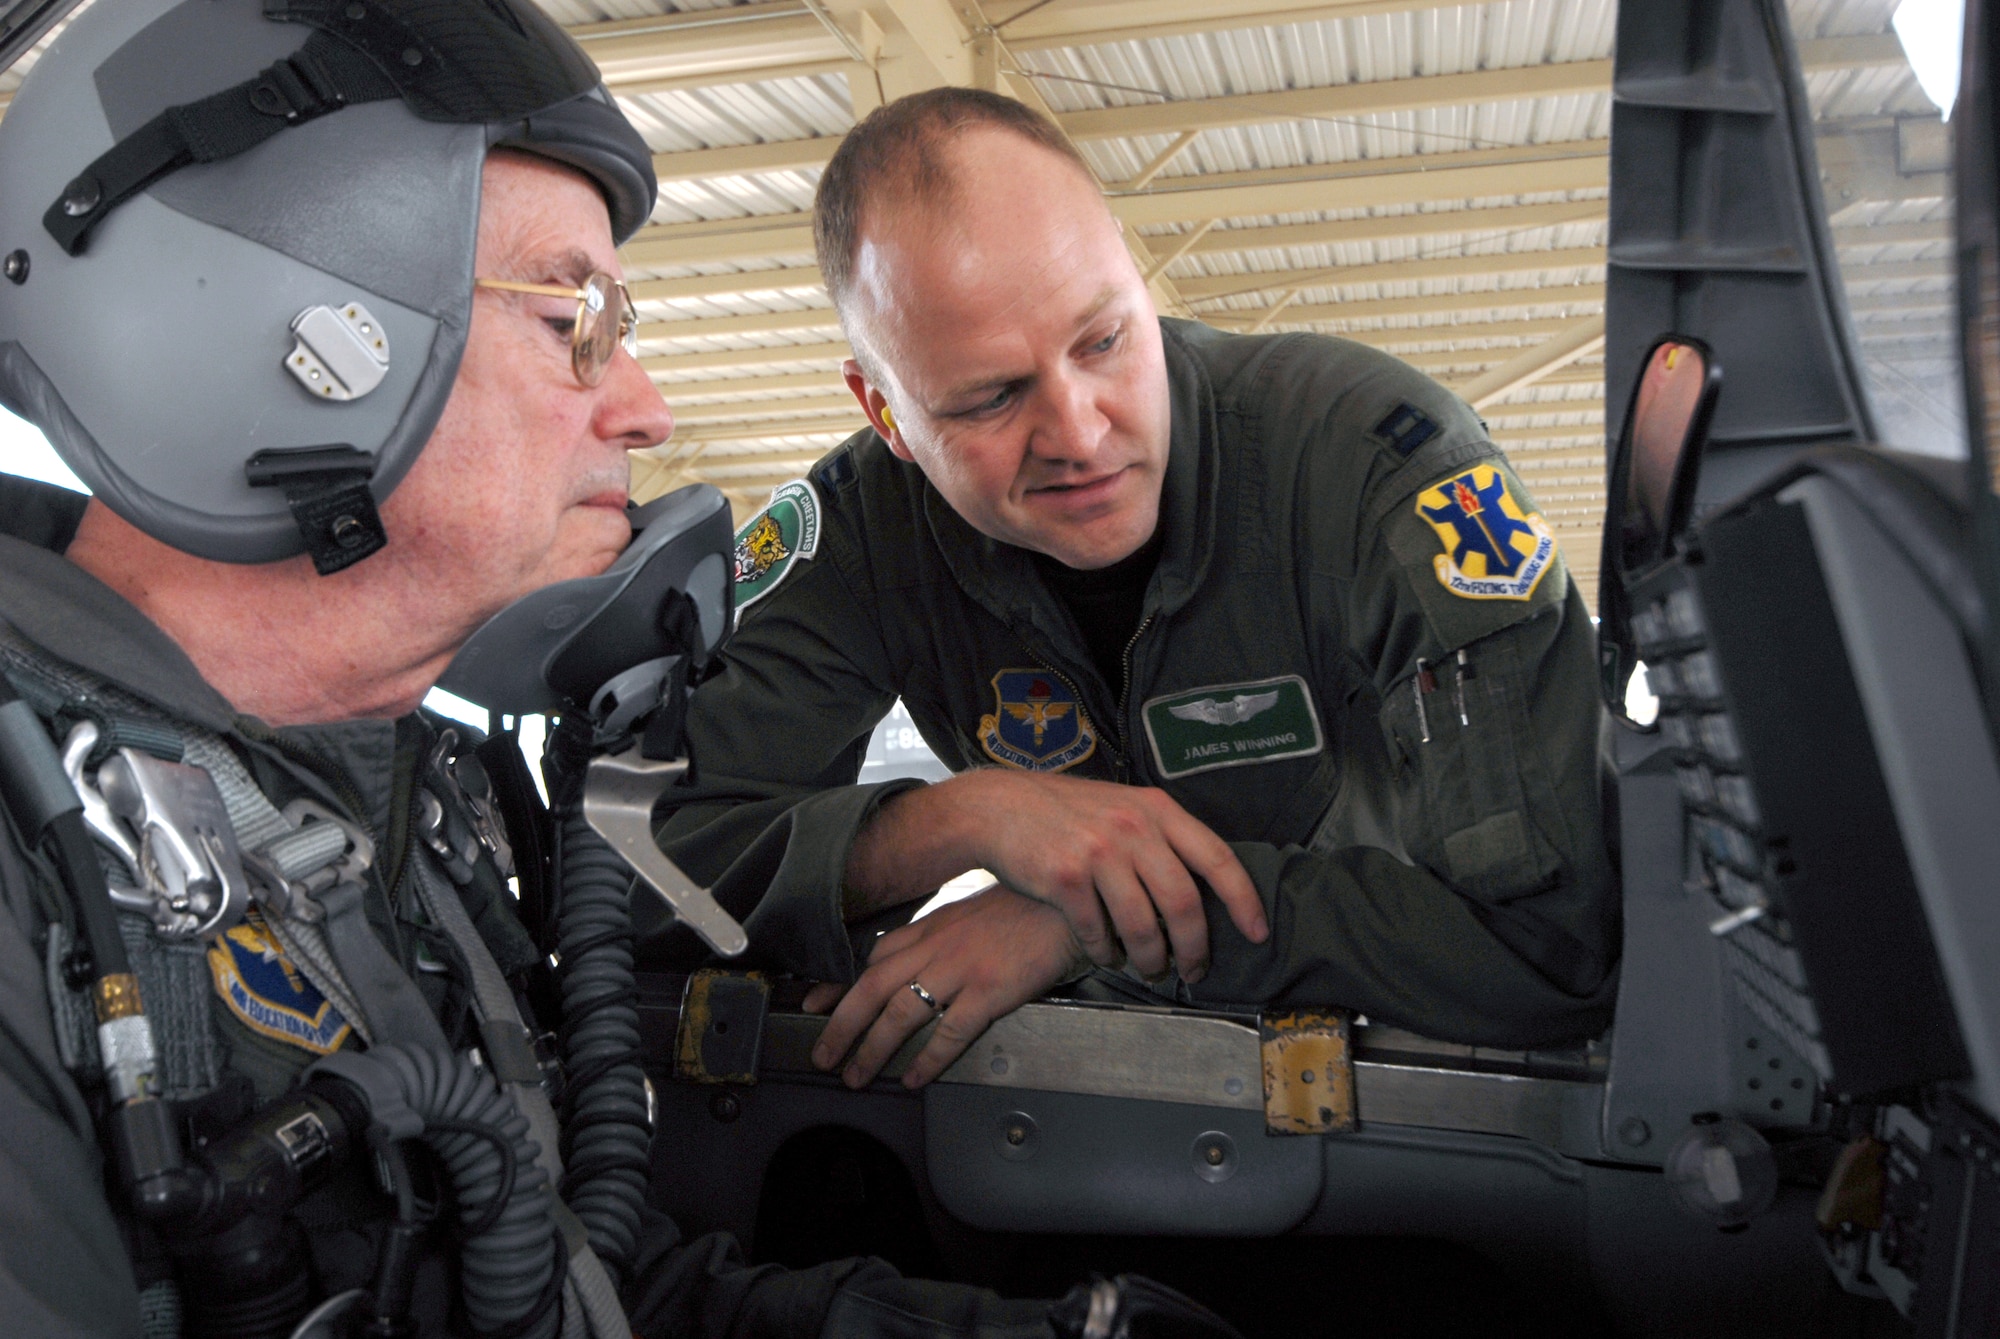 Capt. James Winning, 560th Flying Training Squadron, reviews cockpit controls with Col. (retired) Ken Cordier in a T-38 Talon March 28 during the 35th annual Freedom Flyers Reunion. Colonel Cordier was honored with a ride in the Talon. (U.S. Air Force photo by Steve White)